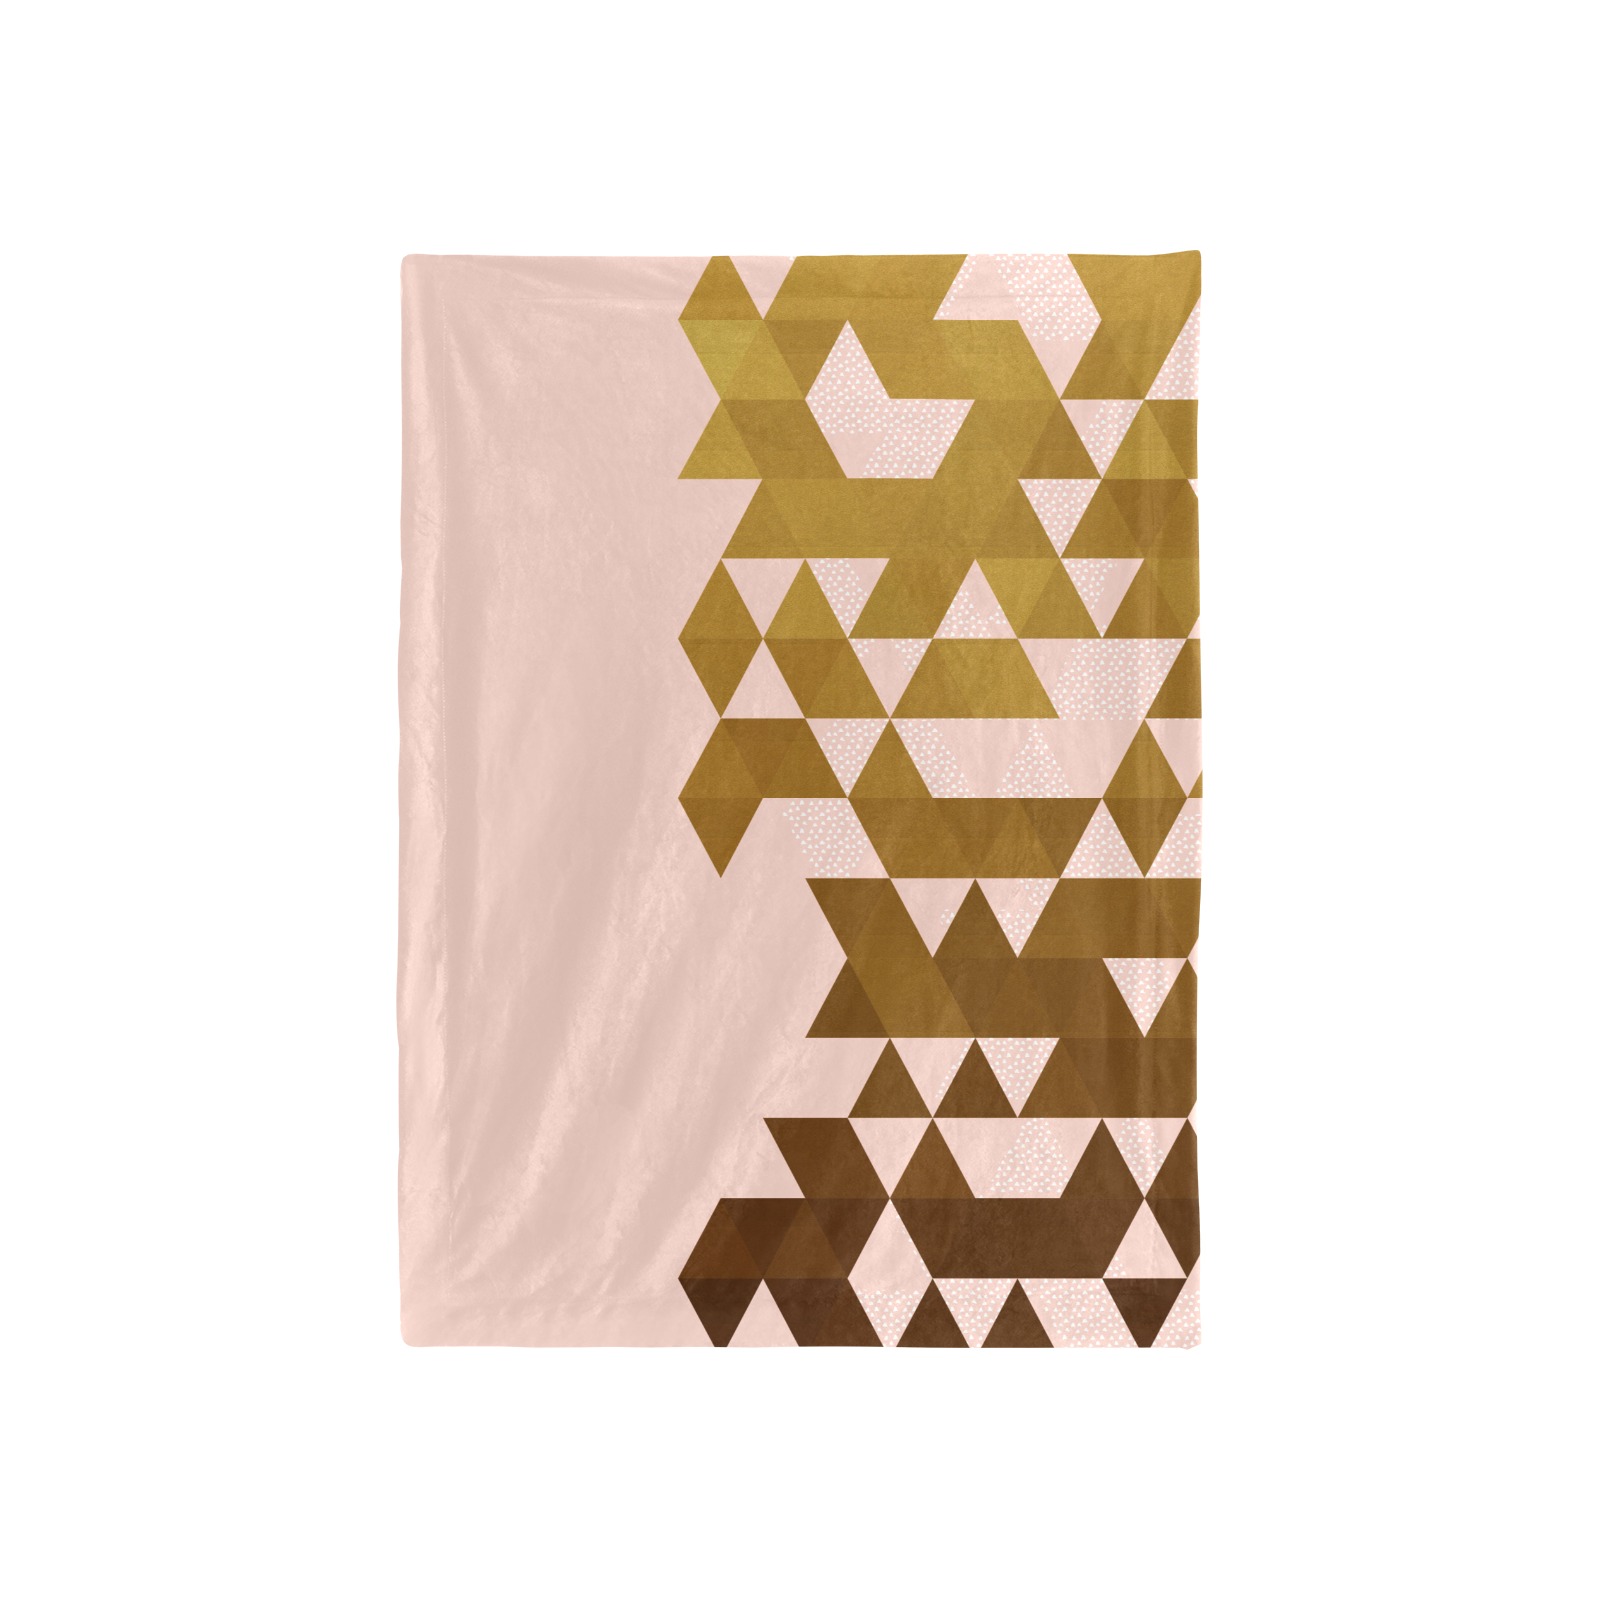 Mosaic of golden triangles Baby Blanket 40"x50"